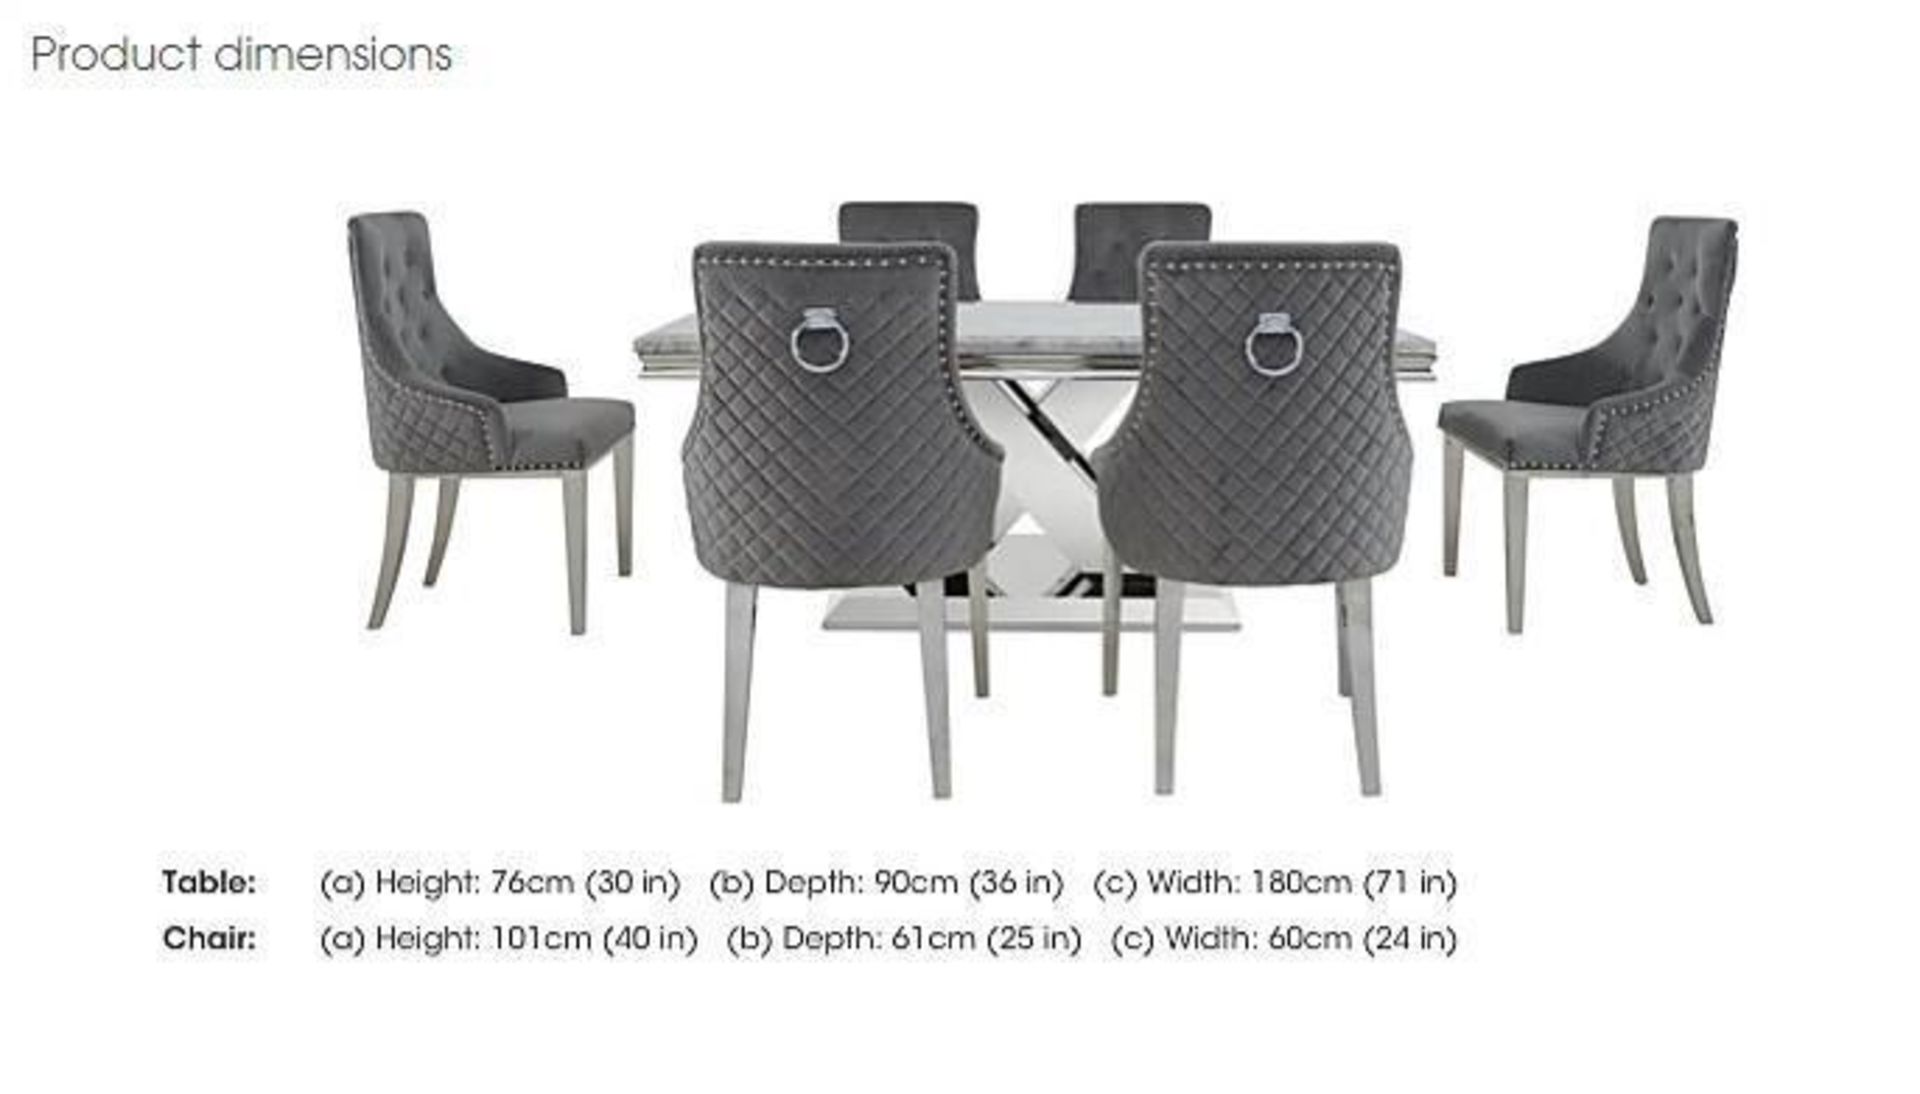 *BRAND NEW* Furniture Village Dolce large grey marble dining table + 6 chairs in velvet RRP: £2249 - Image 5 of 5